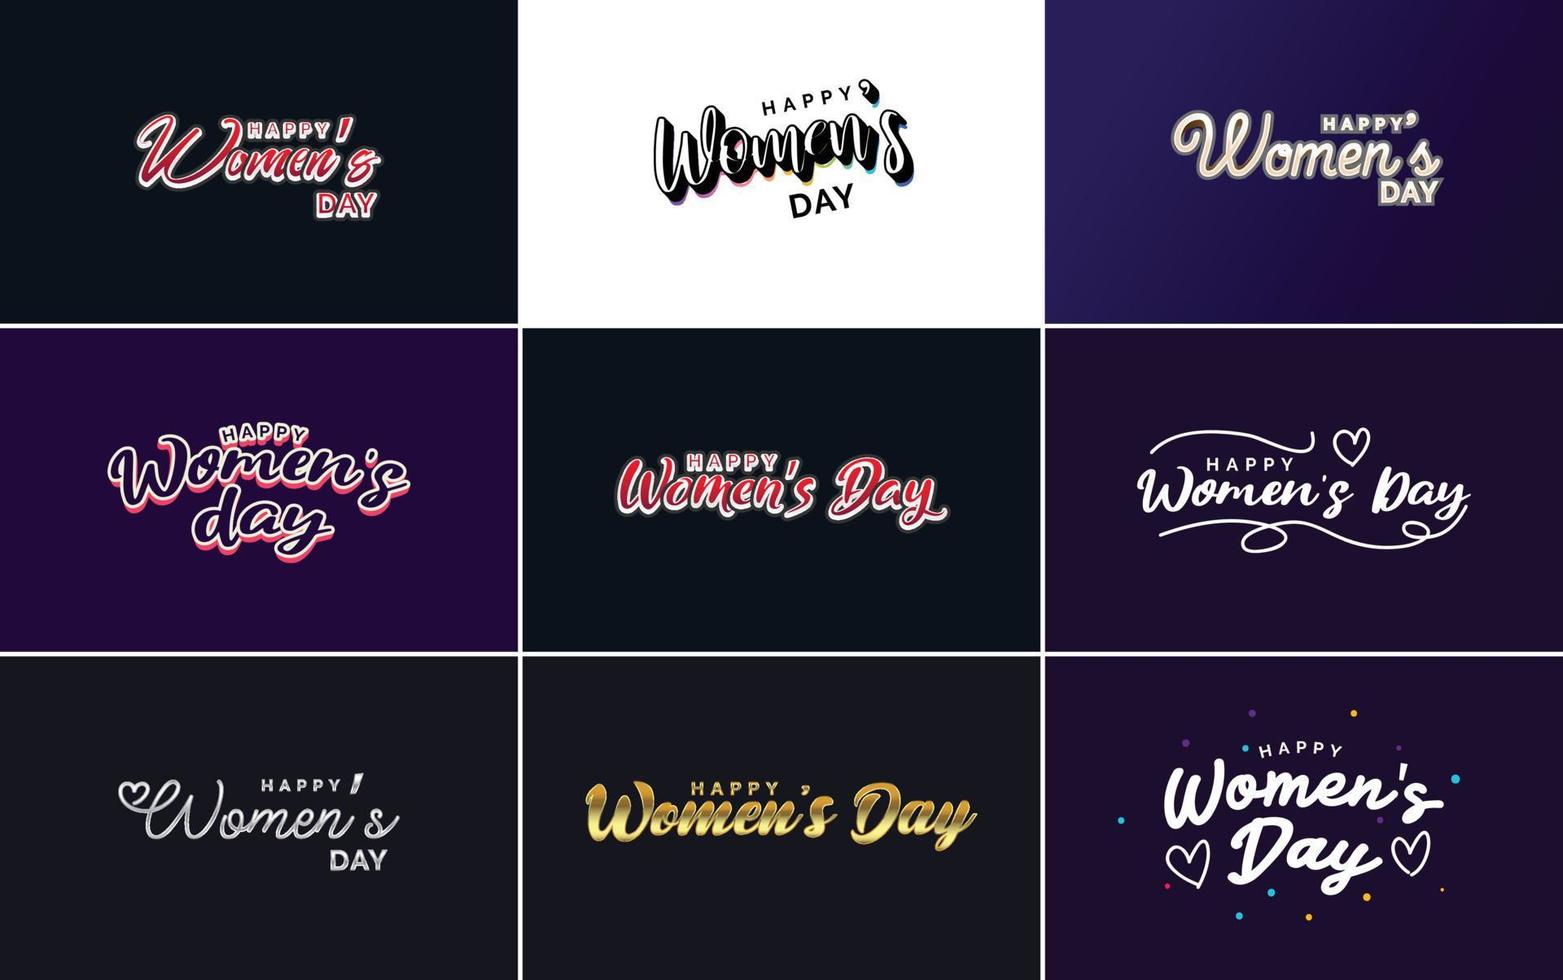 Set of cards with International Women's Day logo vector